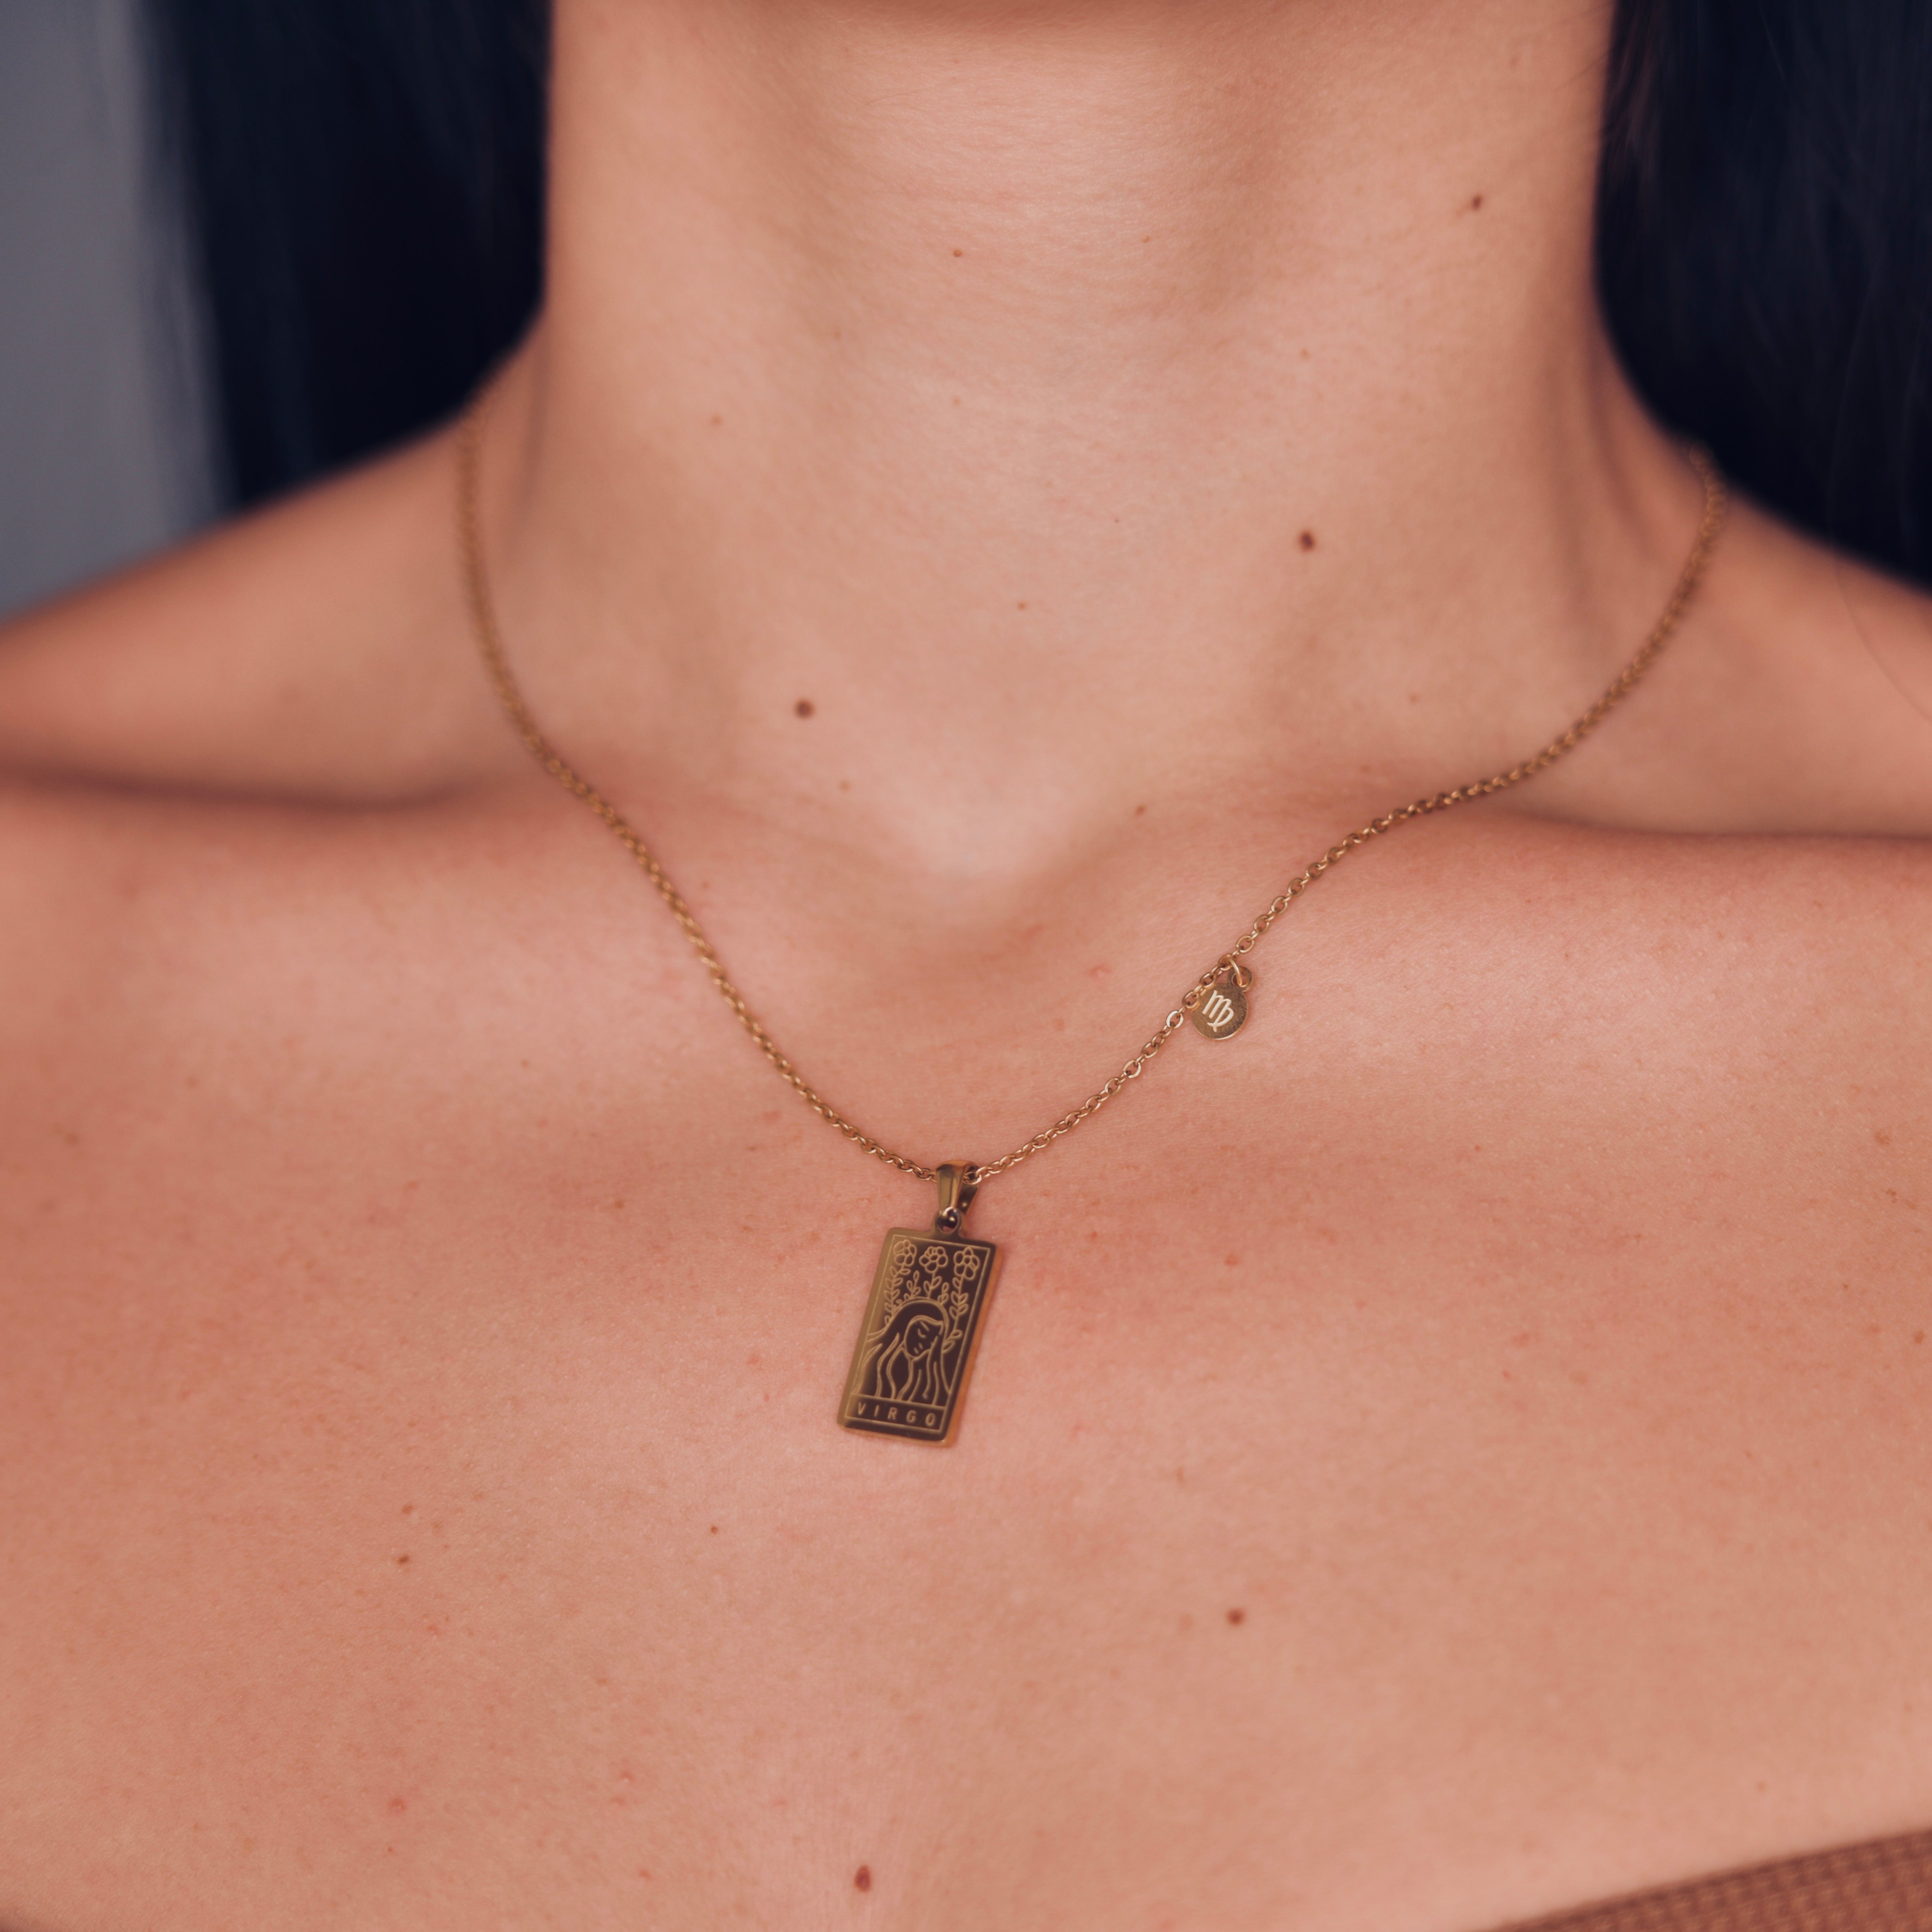 Rectangular gold pendant with a woman engraved representing virgo and the word virgo in the bottom. Gold pendant with a chain necklace. In the side of the gold pendant is a circle small medalion with the symbol of virgo engraved on it. Virgo zodiac pendant gold necklace.